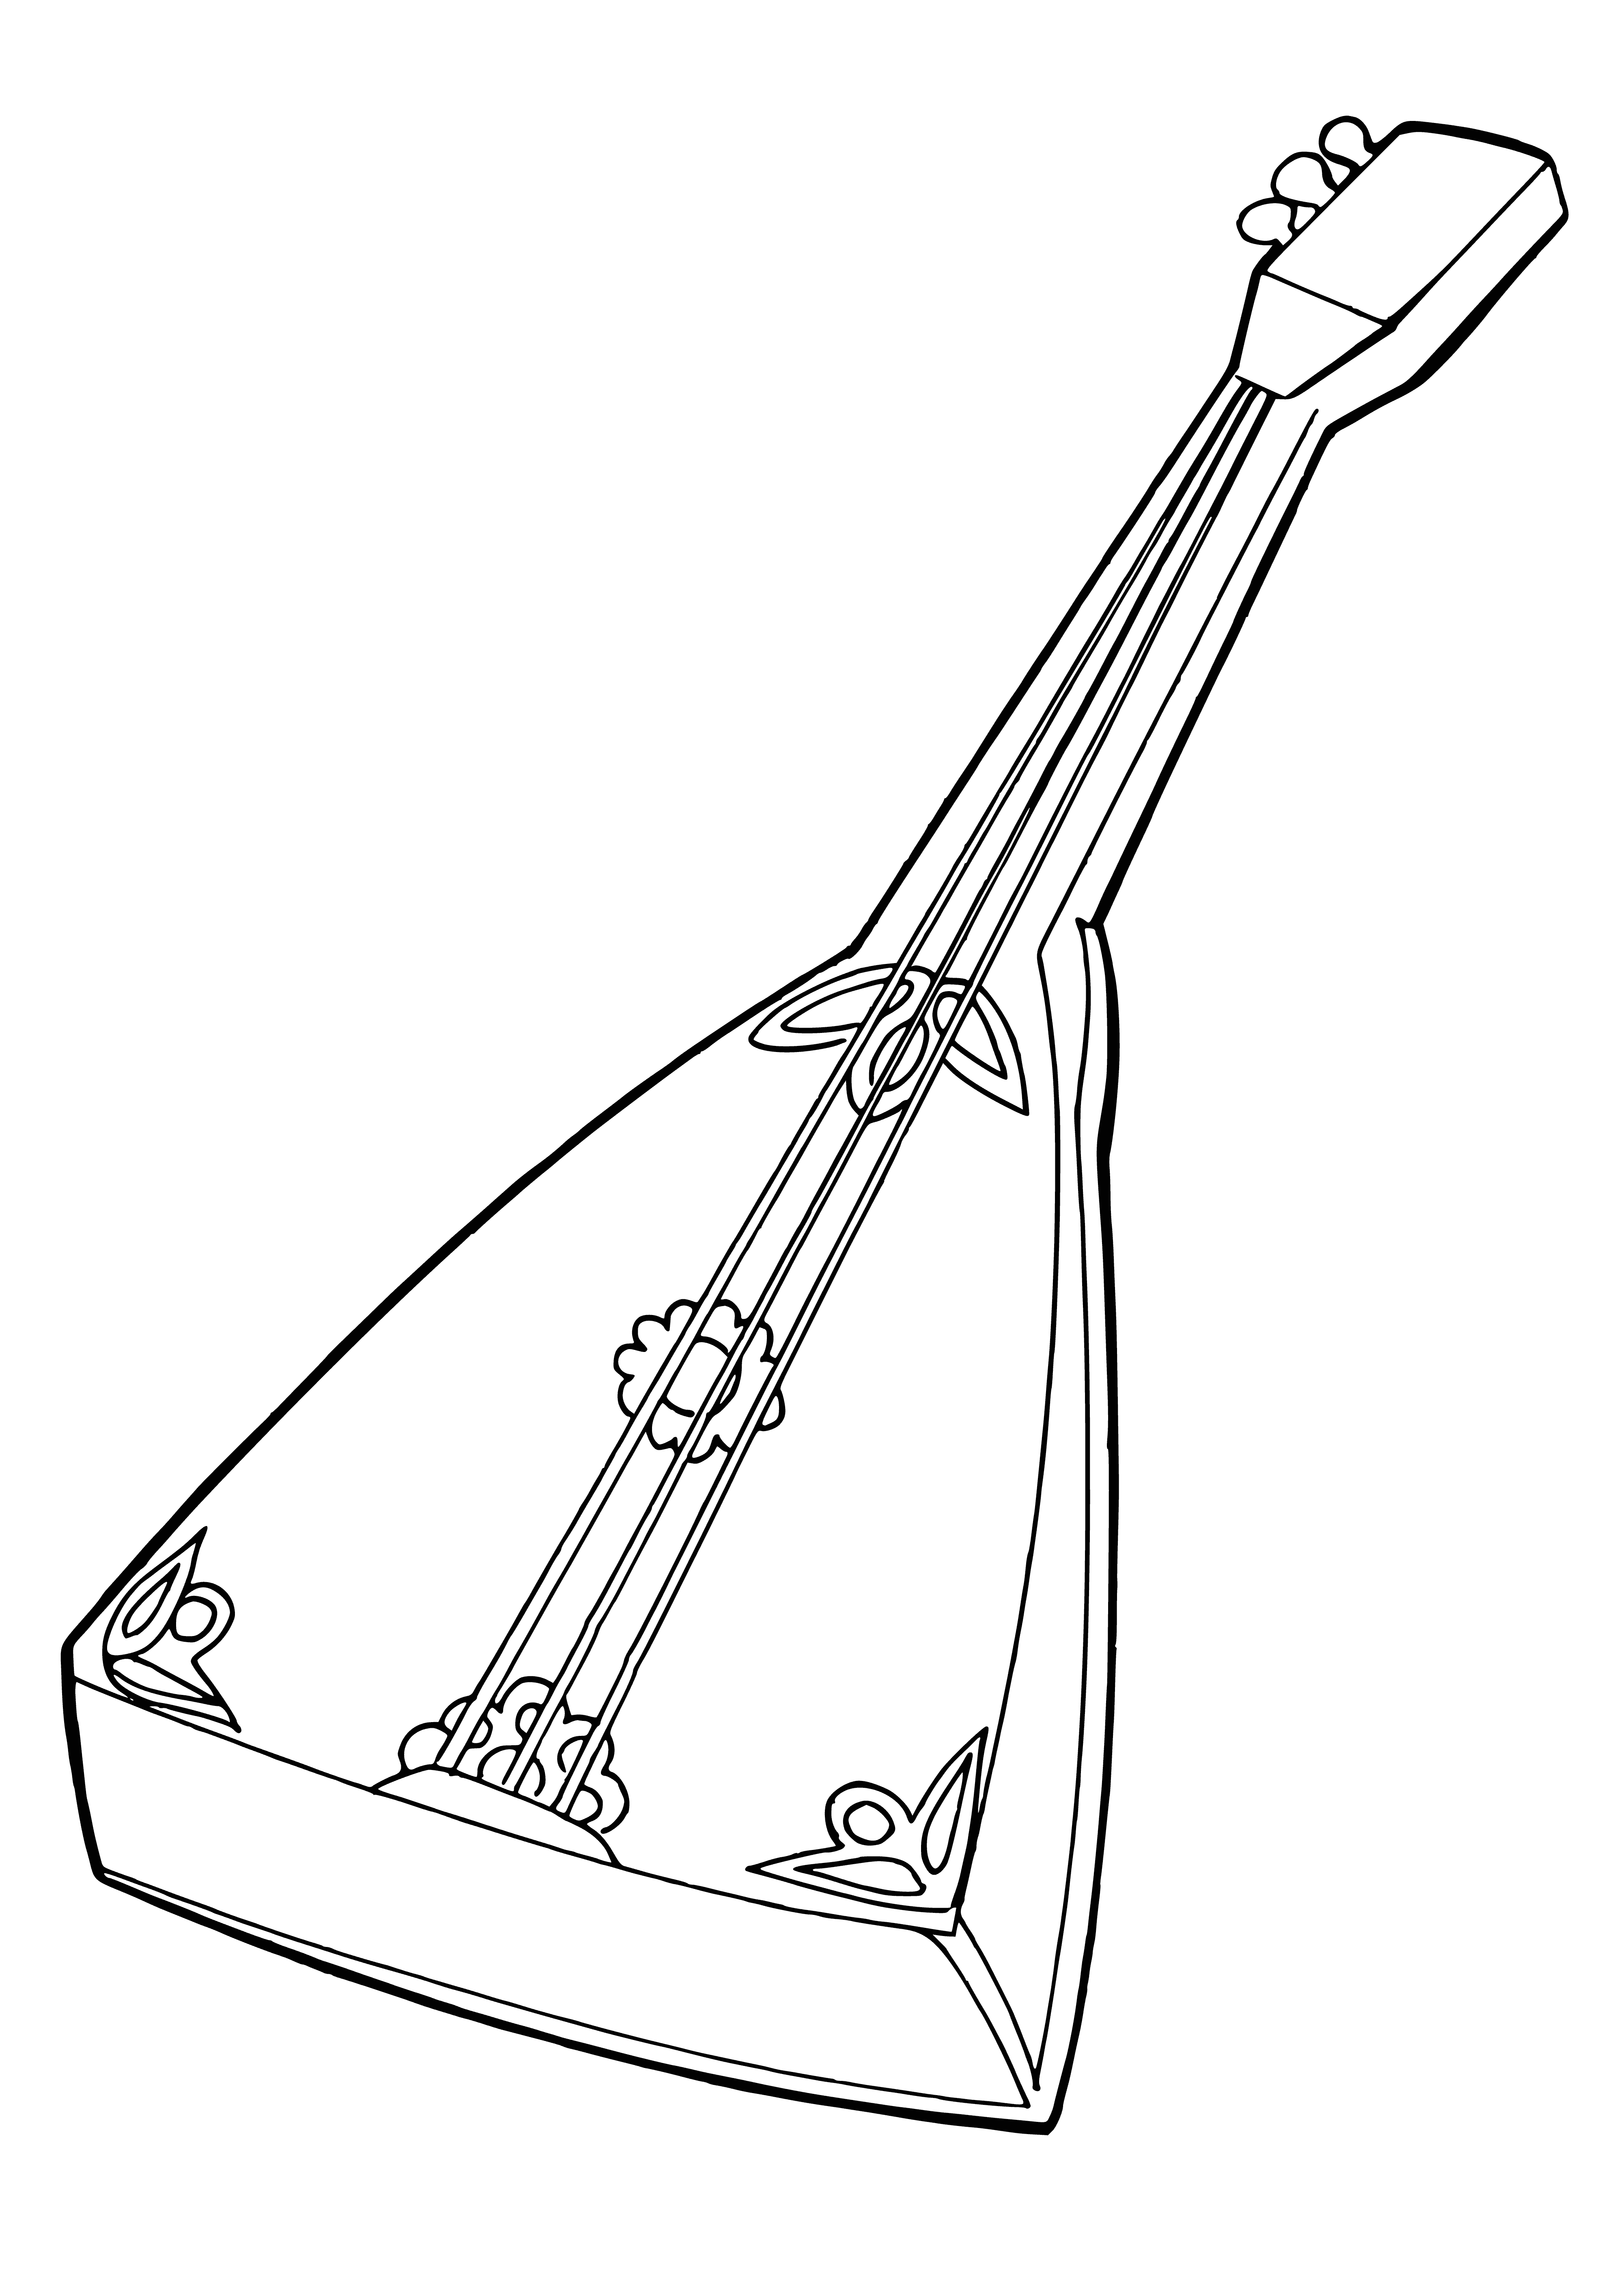 coloring page: A Balalaika, a traditional Russian instrument with a triangle body and three strings, is propped up against a tree in the middle of a field with mountains in the distance. #musicalinstrument